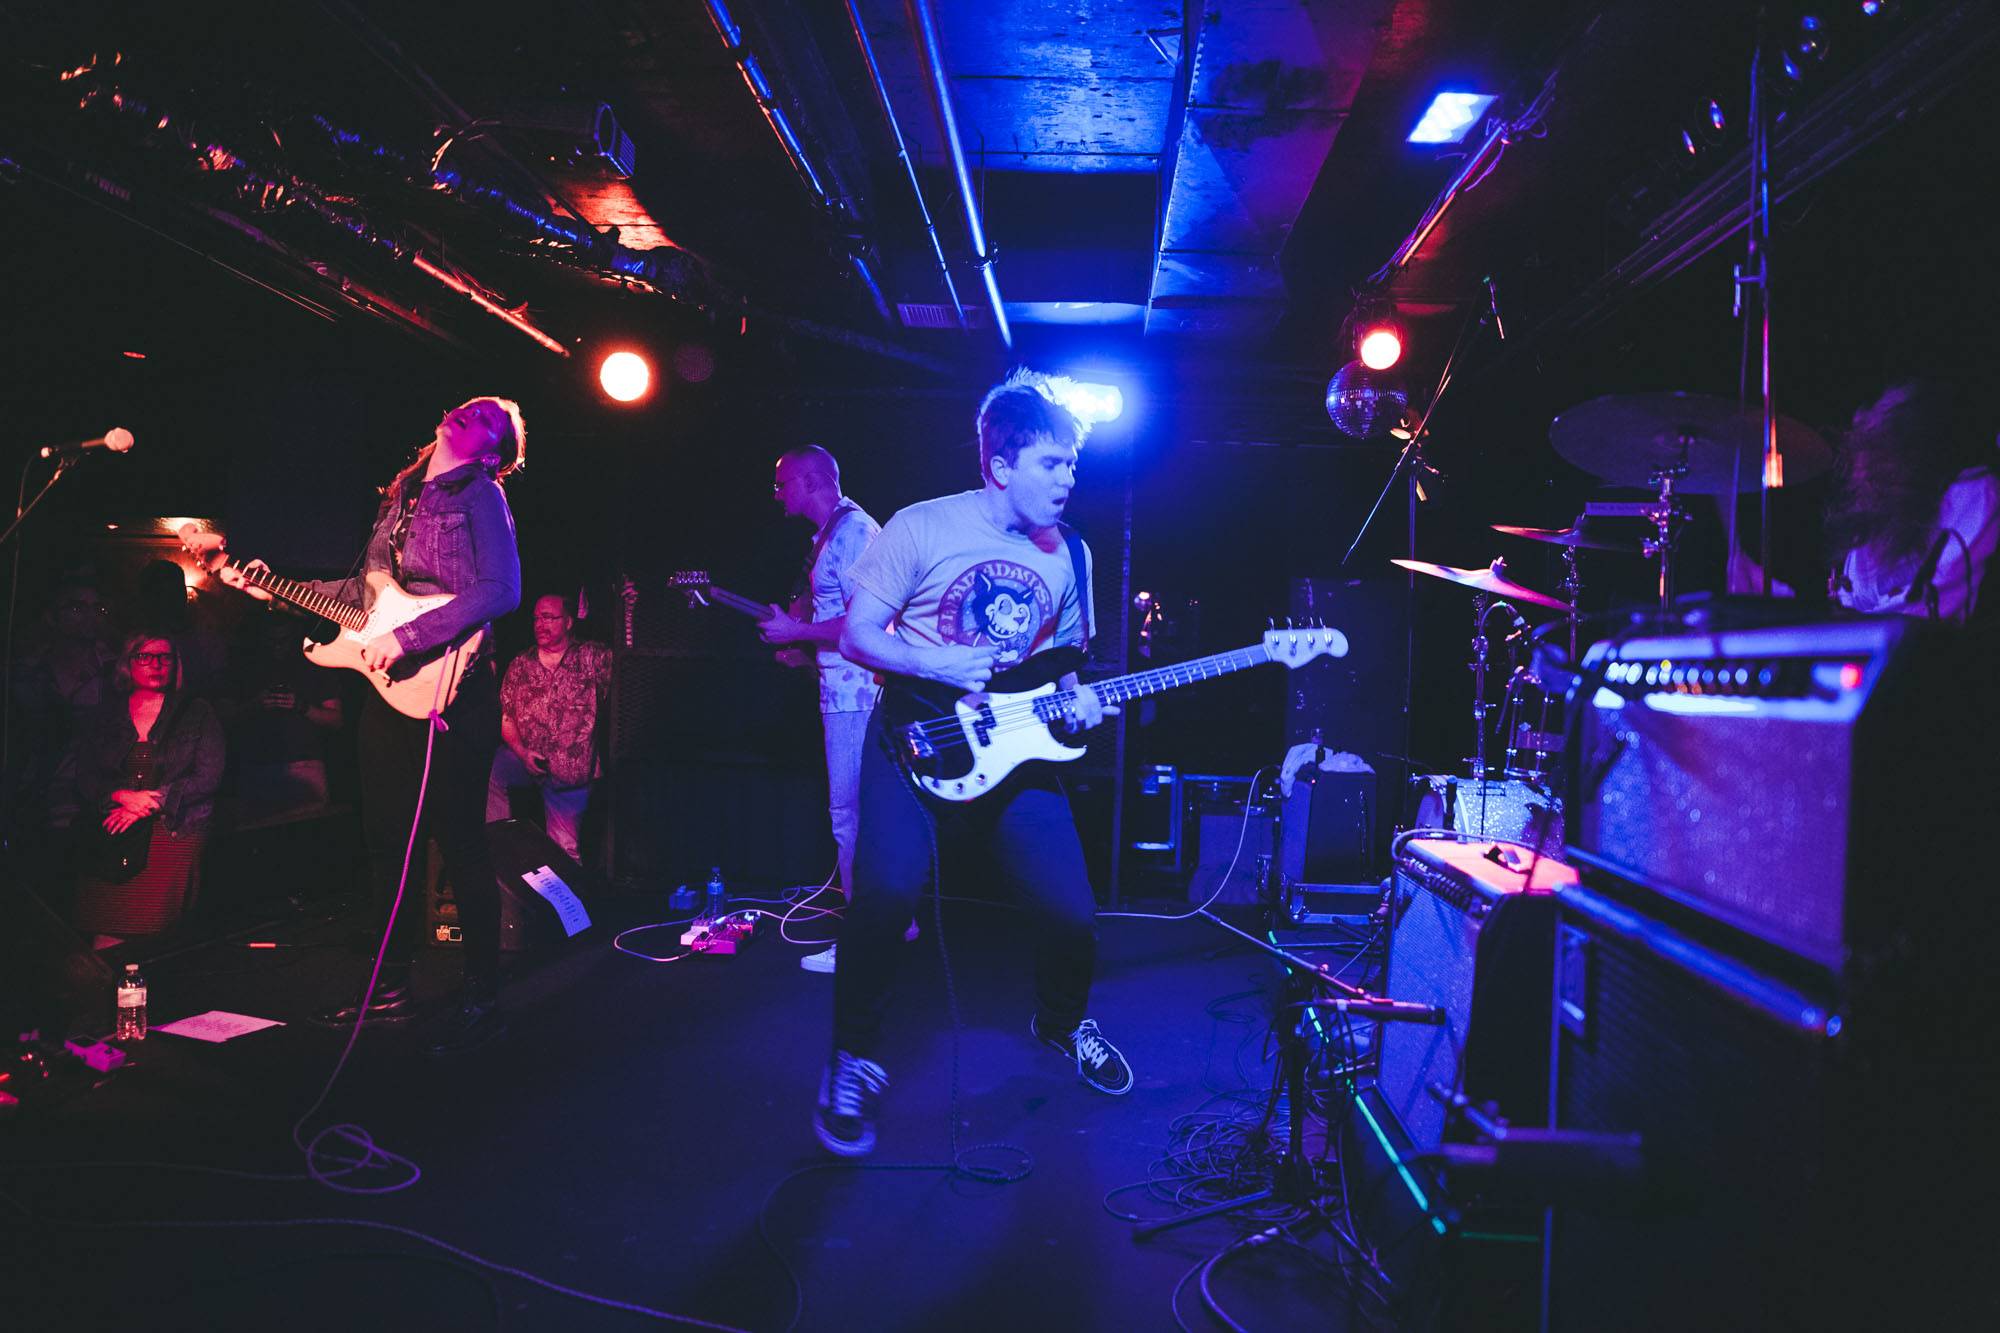 Middle Kids at the Biltmore Cabaret, Vancouver, Aug 31 2017. Kelli Anne photo.